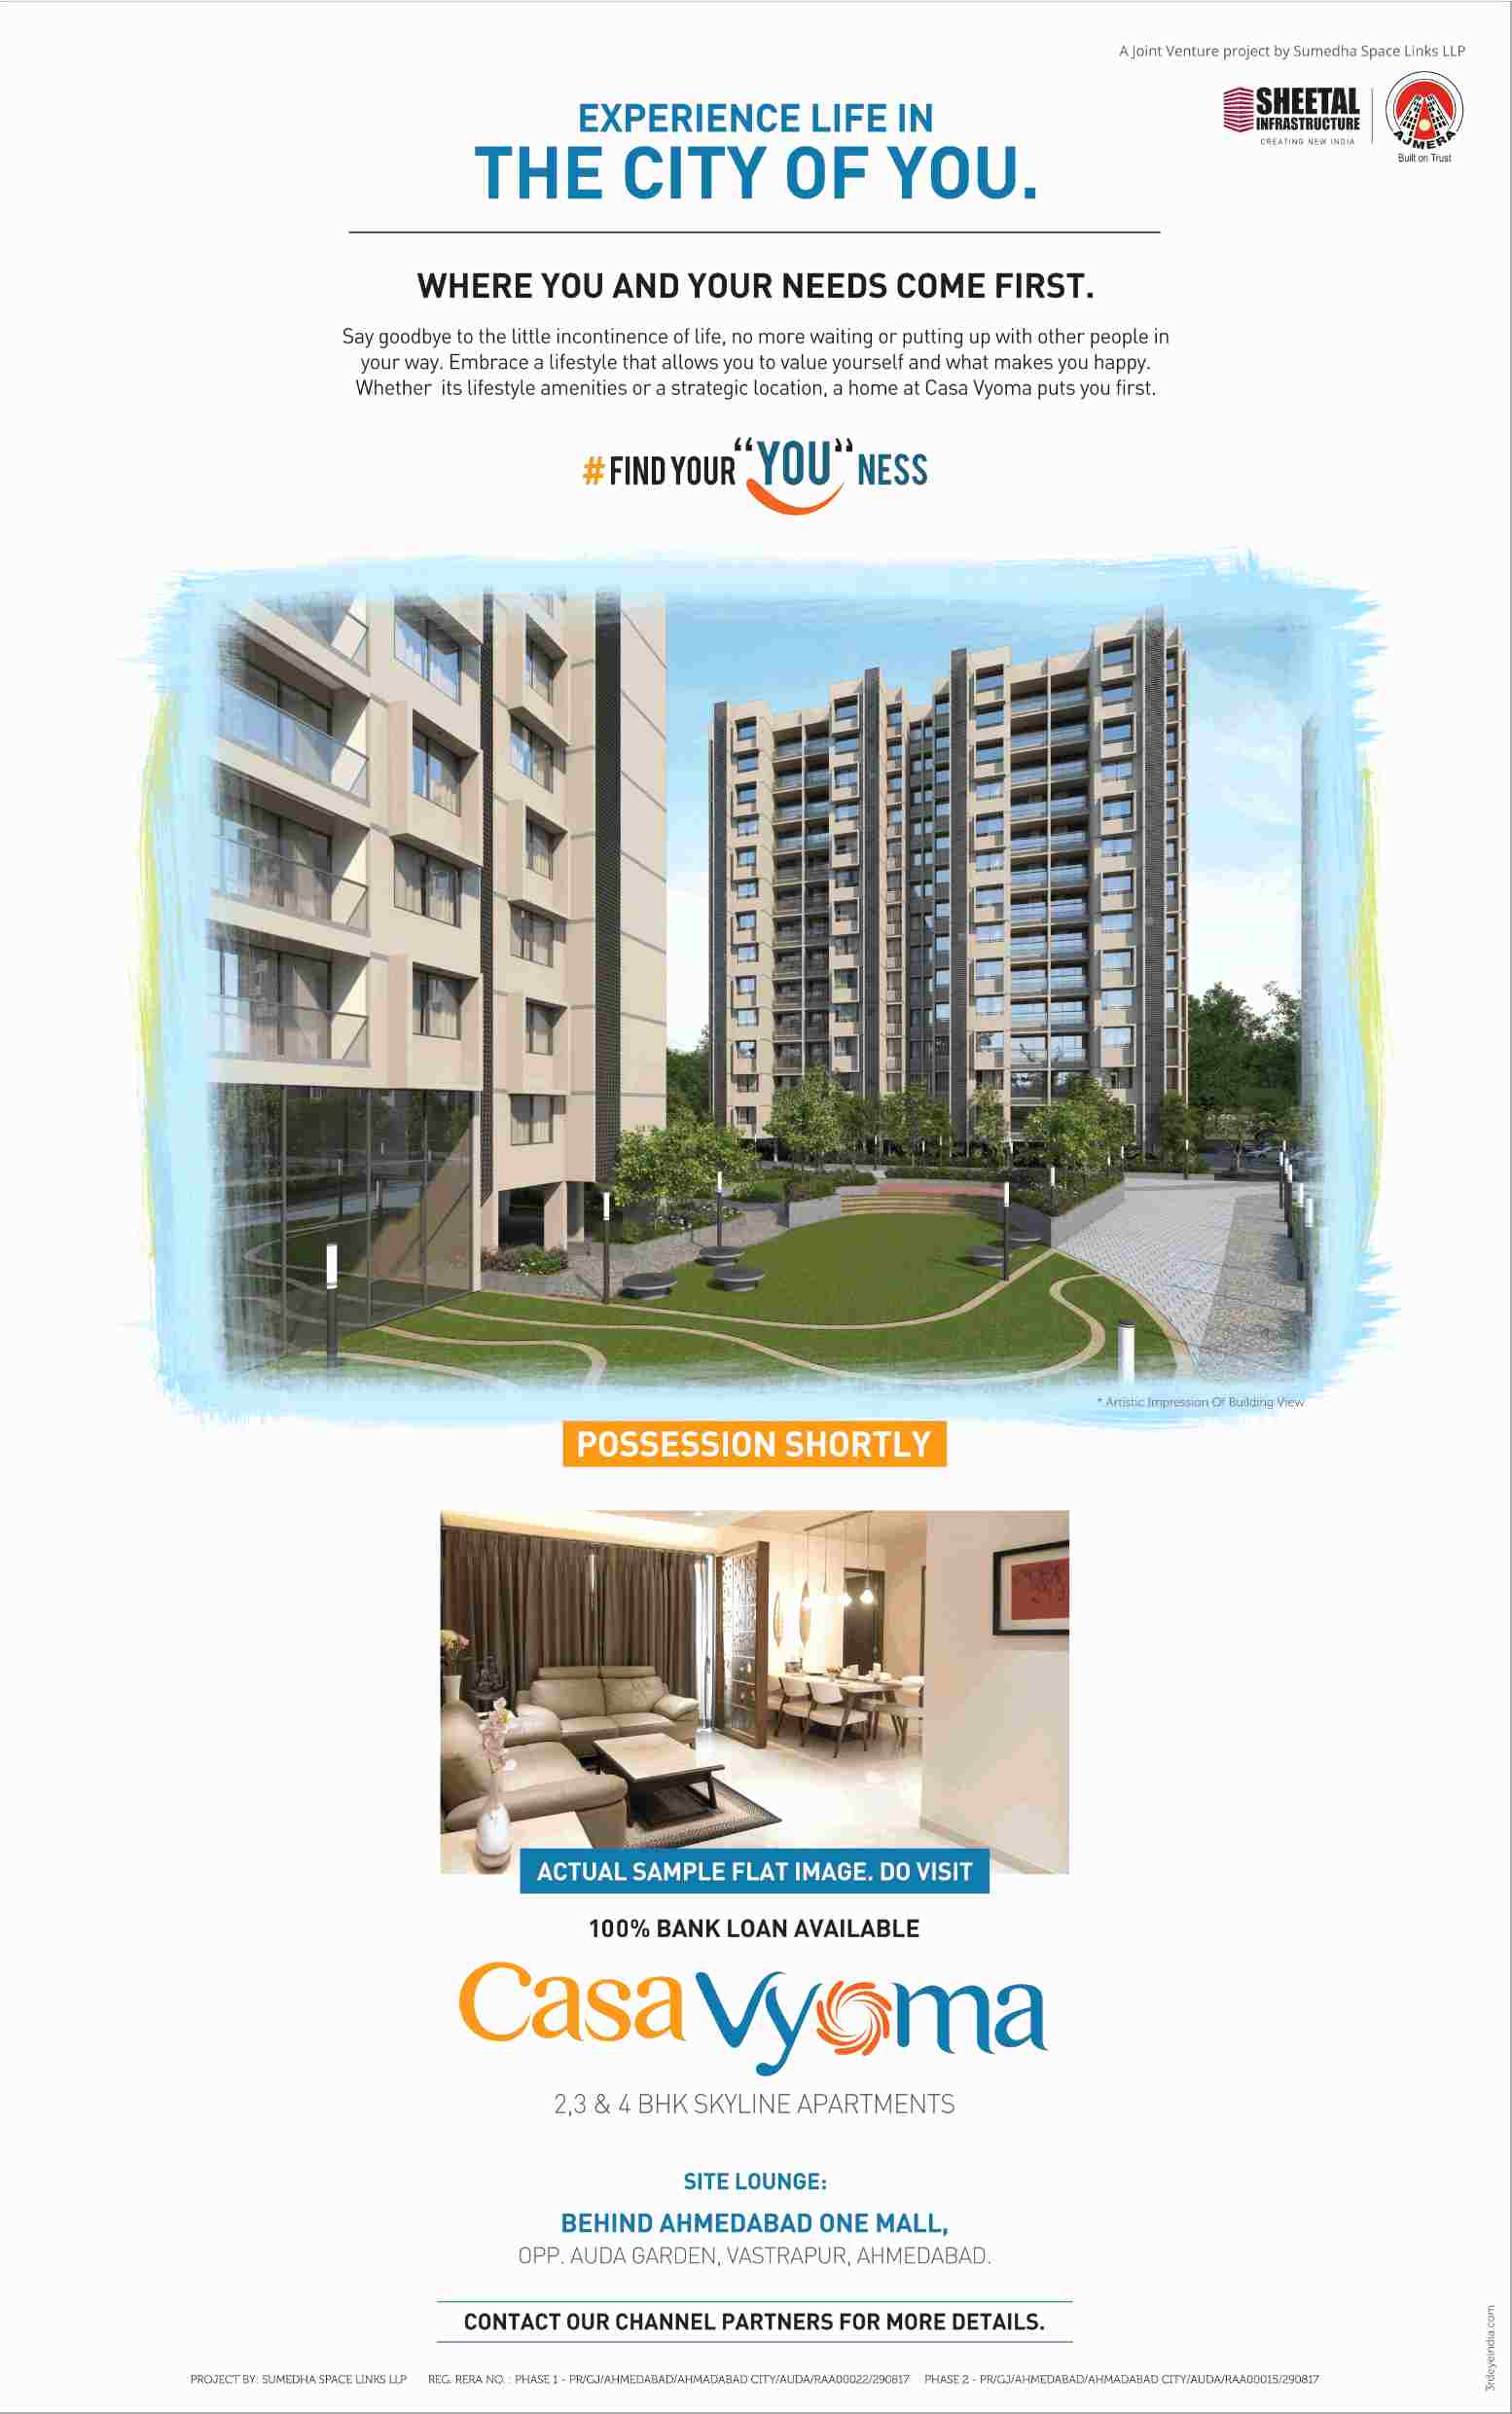 Live in homes where you and your needs come first at Sheetal Casa Vyoma in Ahmedabad Update